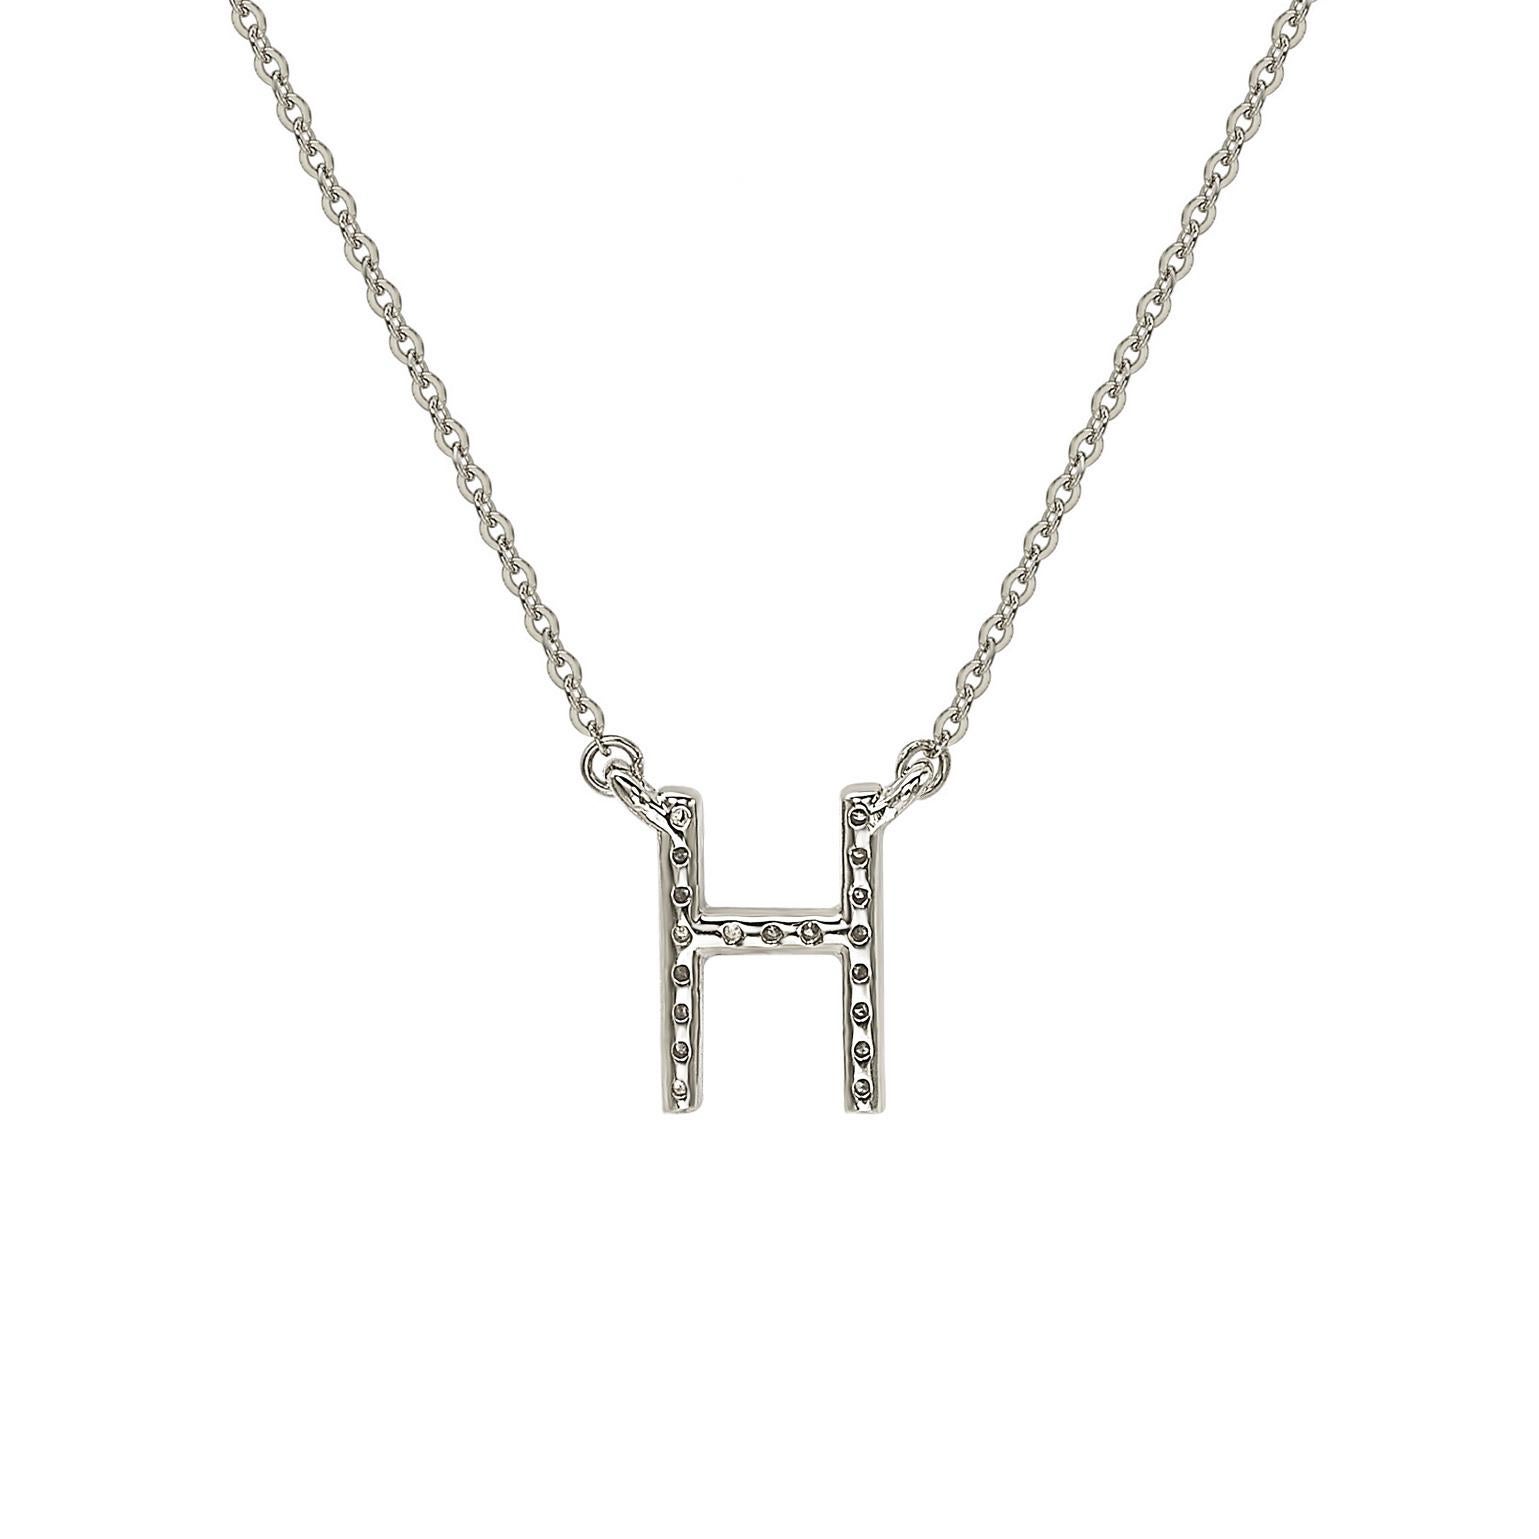 This breathtaking personalized Suzy Levian letter necklace features natural diamonds, hand-set in 14-Karat white gold. It's the perfect individualized gift to let someone special know you're thinking of them. Each letter necklace features a row of